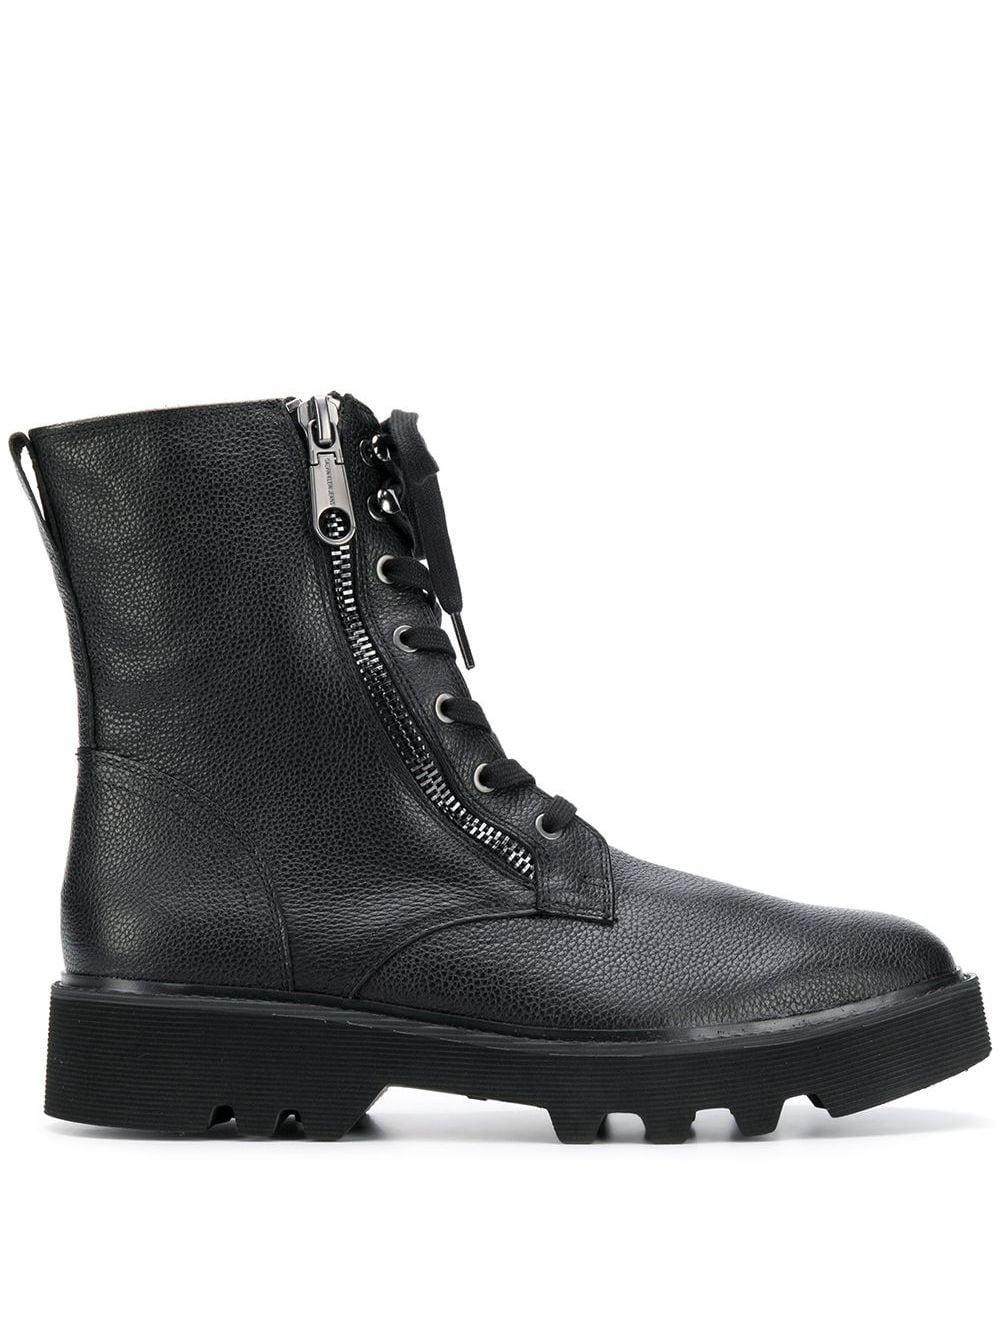 Calvin Klein Military Boots in Black for Men | Lyst